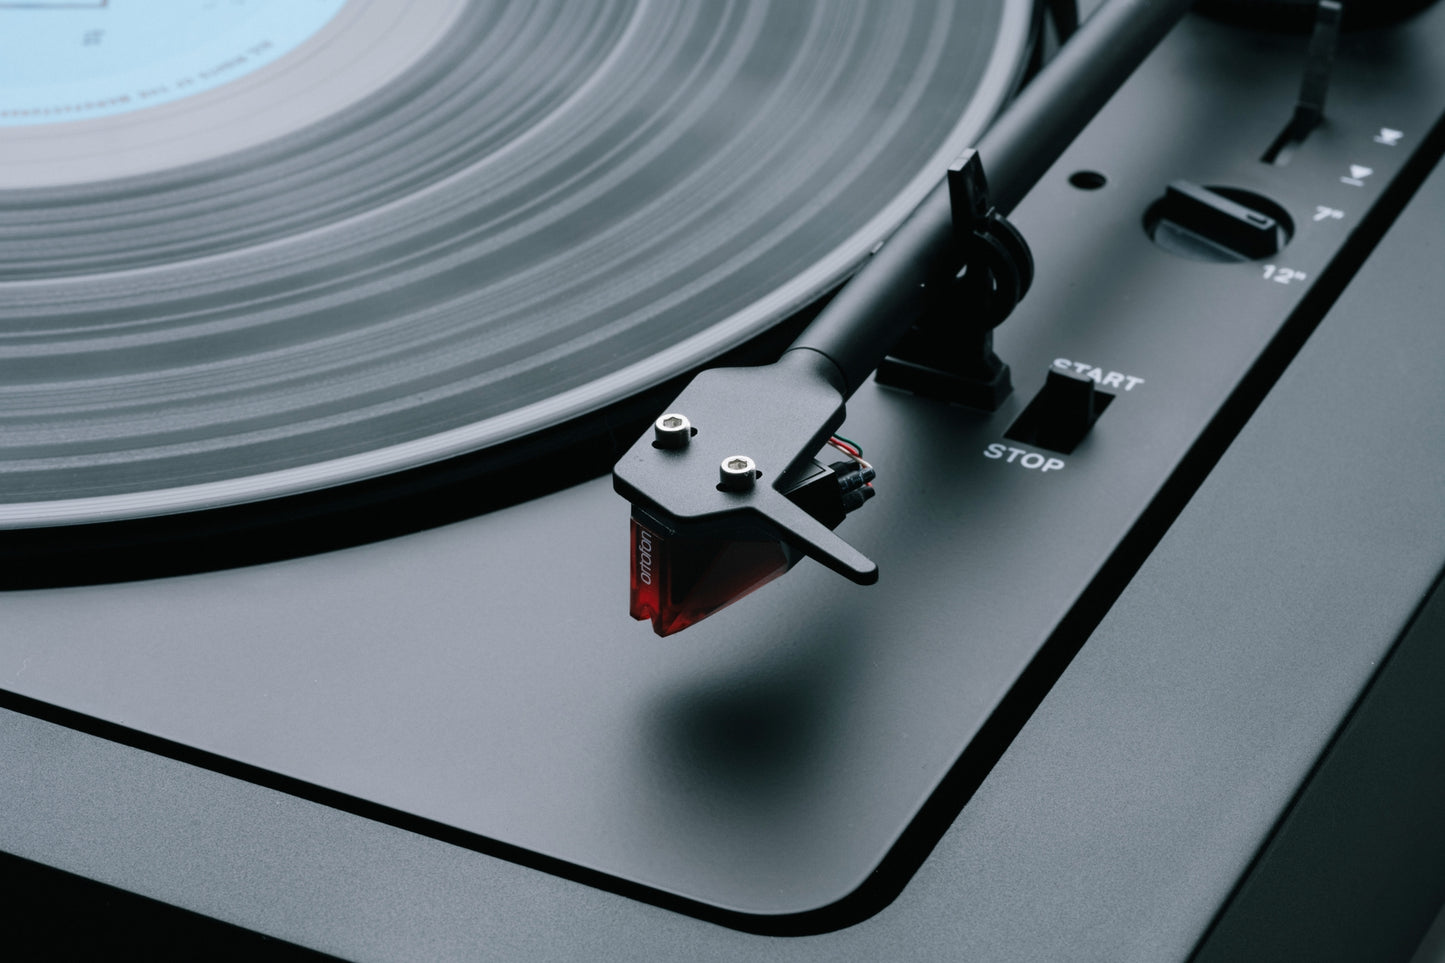 ProJect Automat A2 Turntable with Ortofon 2M Red Cartridge